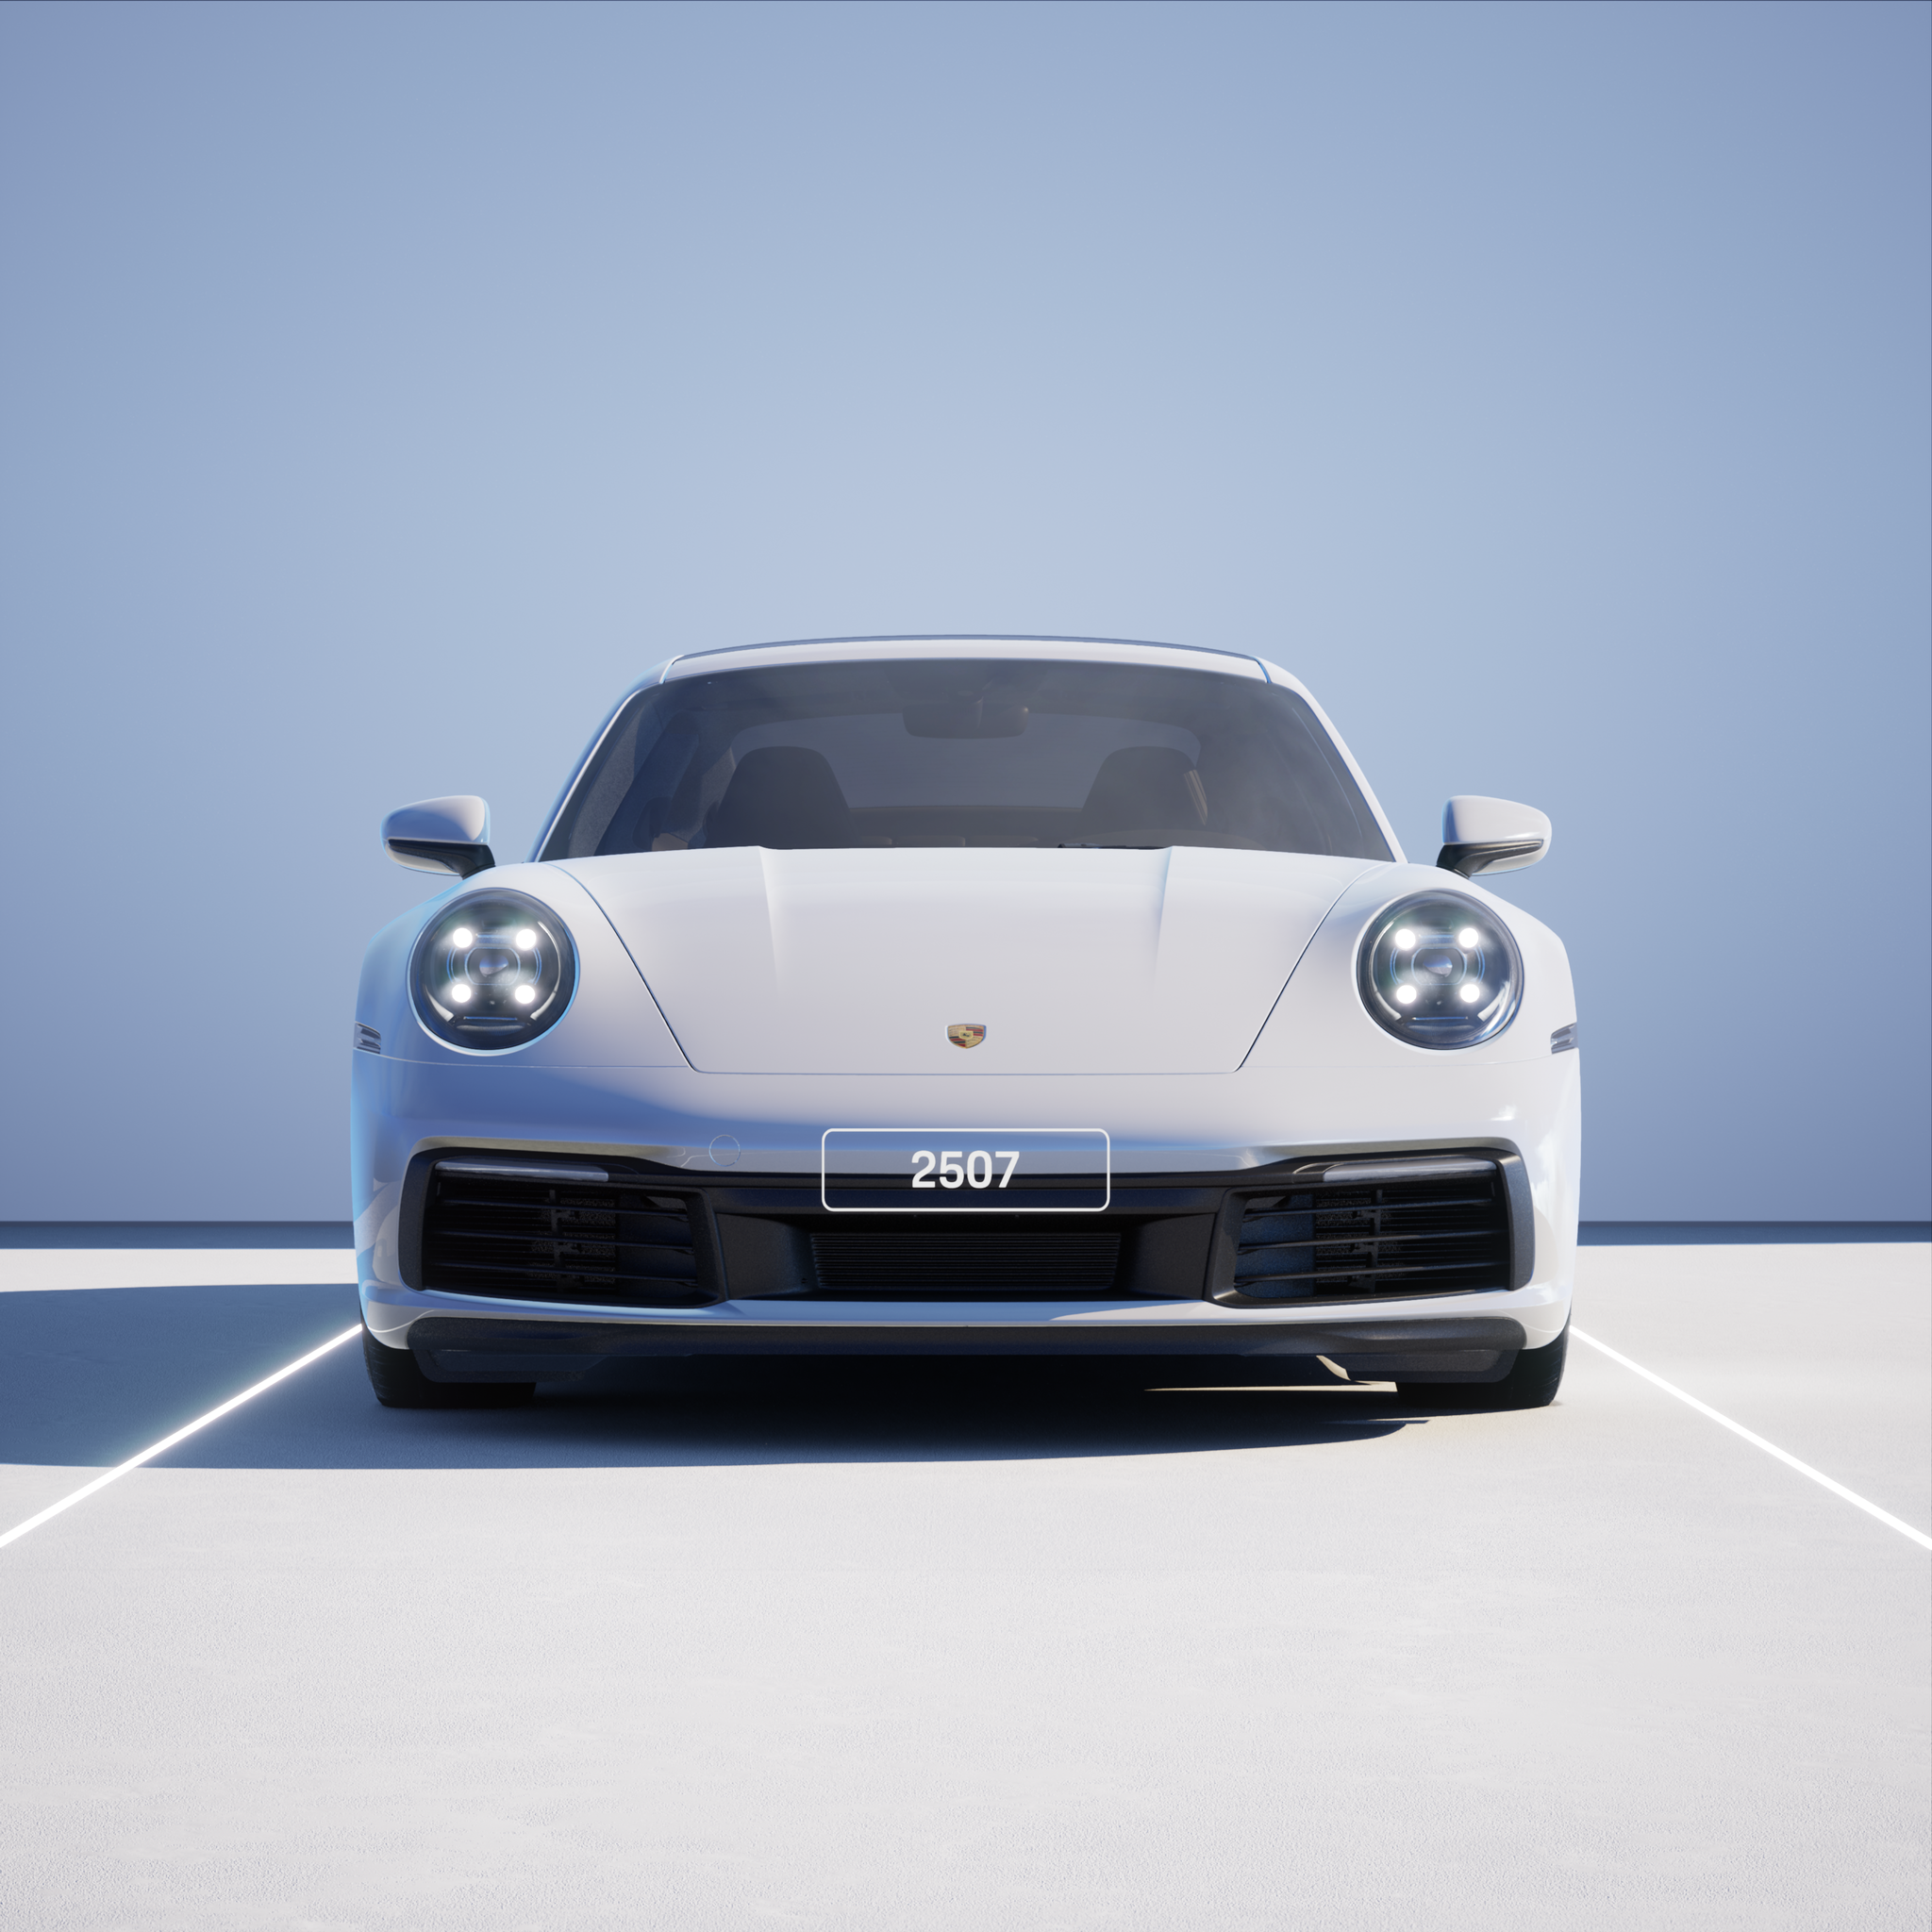 The PORSCHΞ 911 2507 image in phase